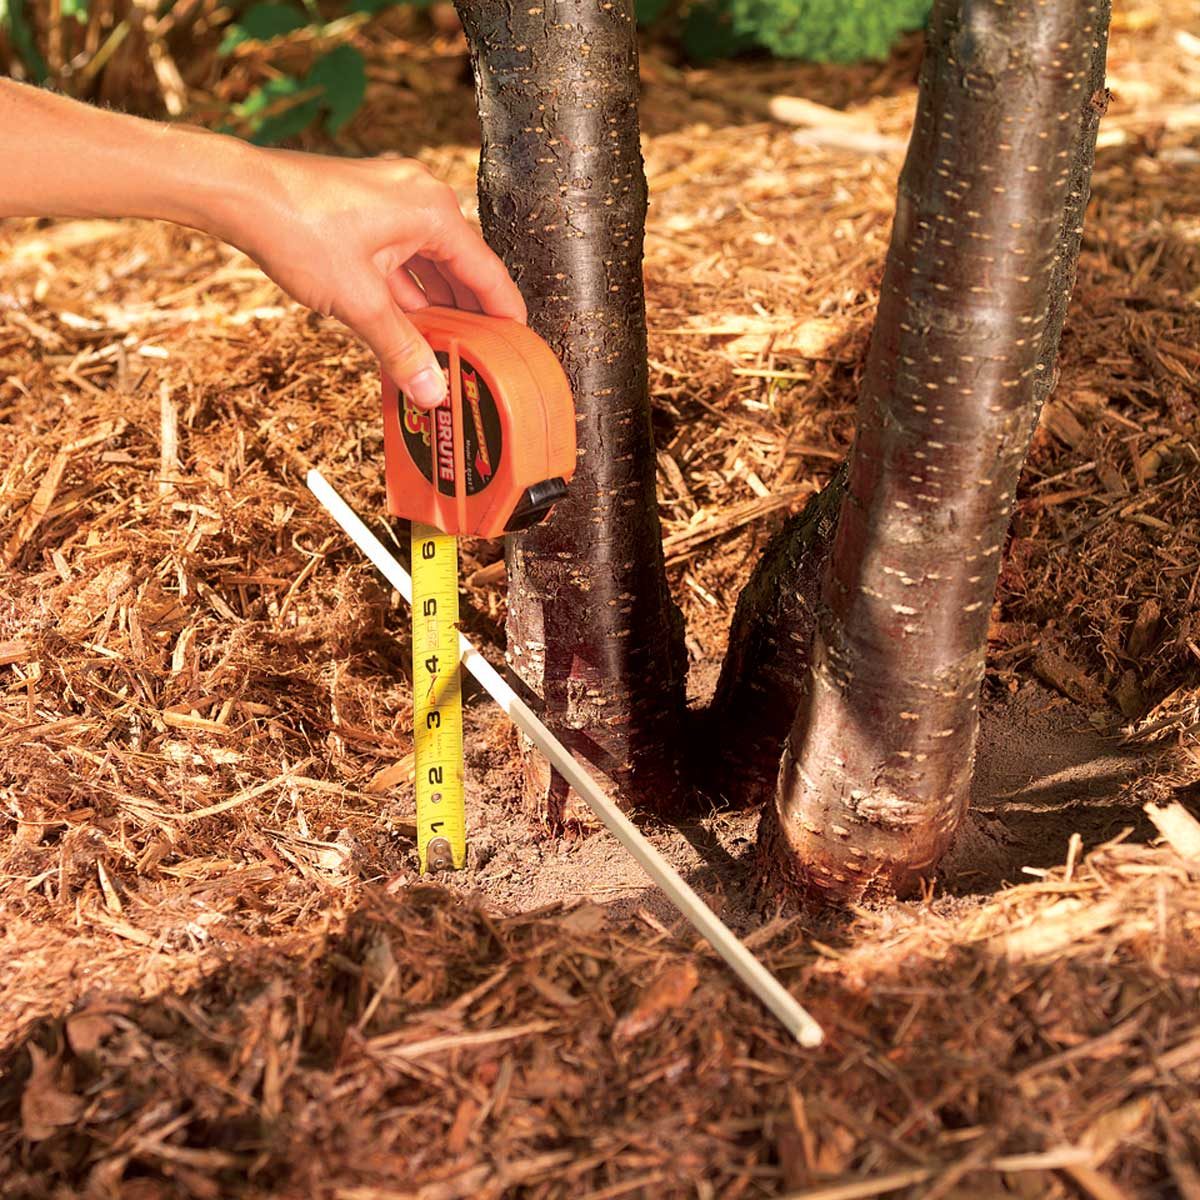 Measuring mulch thickness